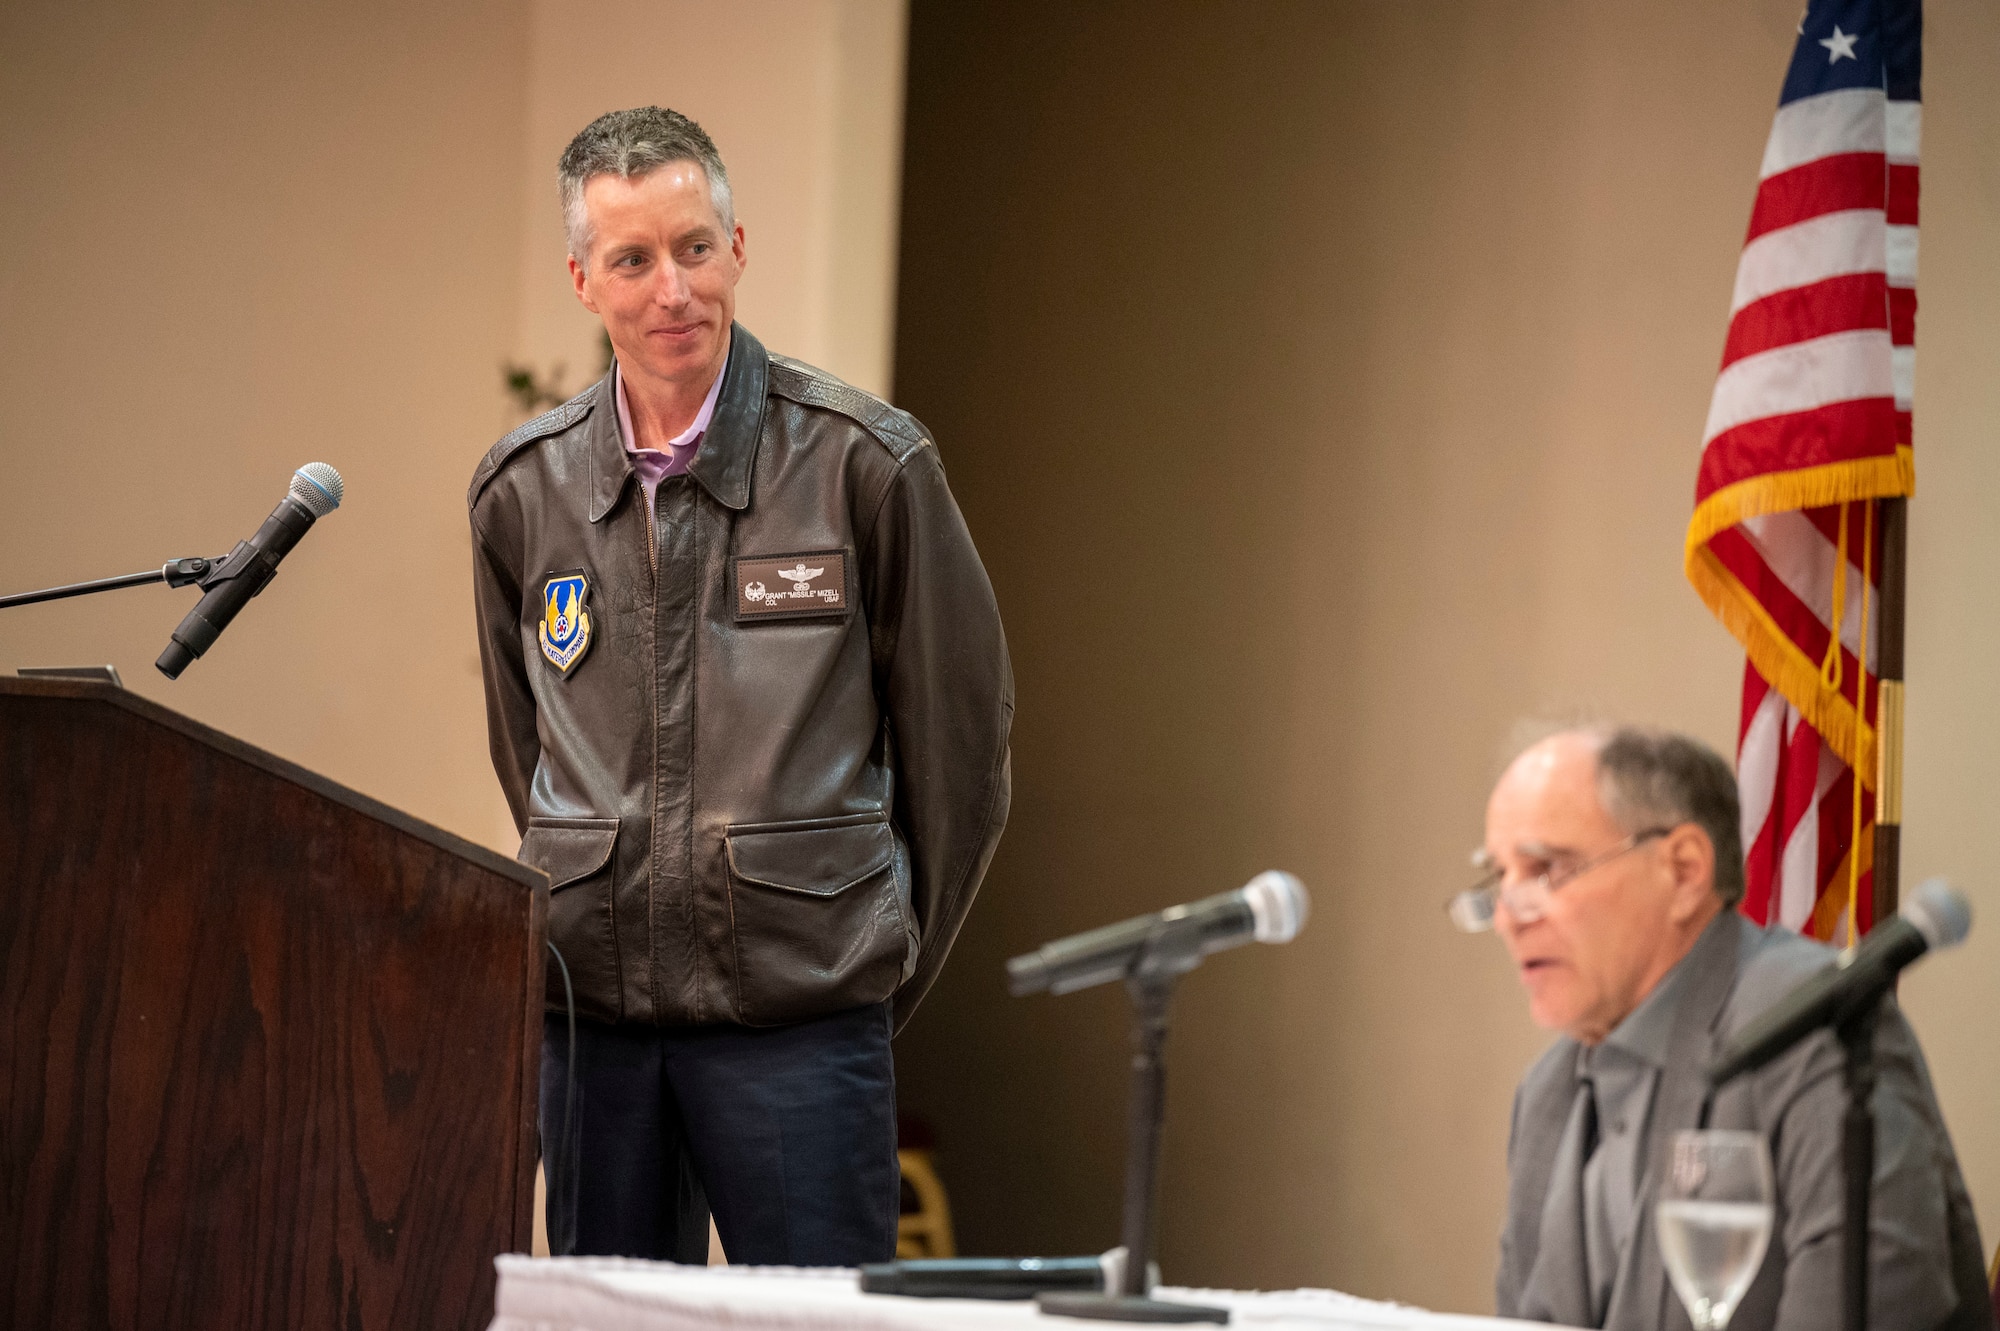 Col. Grant Mizell, Commander, 412th Operations Group moderates the First Flight Consideration Panel. (Panel: Dan Canin, Experimental Test Pilot, Lockheed Martin, Bob Hood, Retired Colonel USAF and test pilot at Northrop Grumman and Evan Thomas, Director of Flight Operations for Stratolaunch, LLC.)